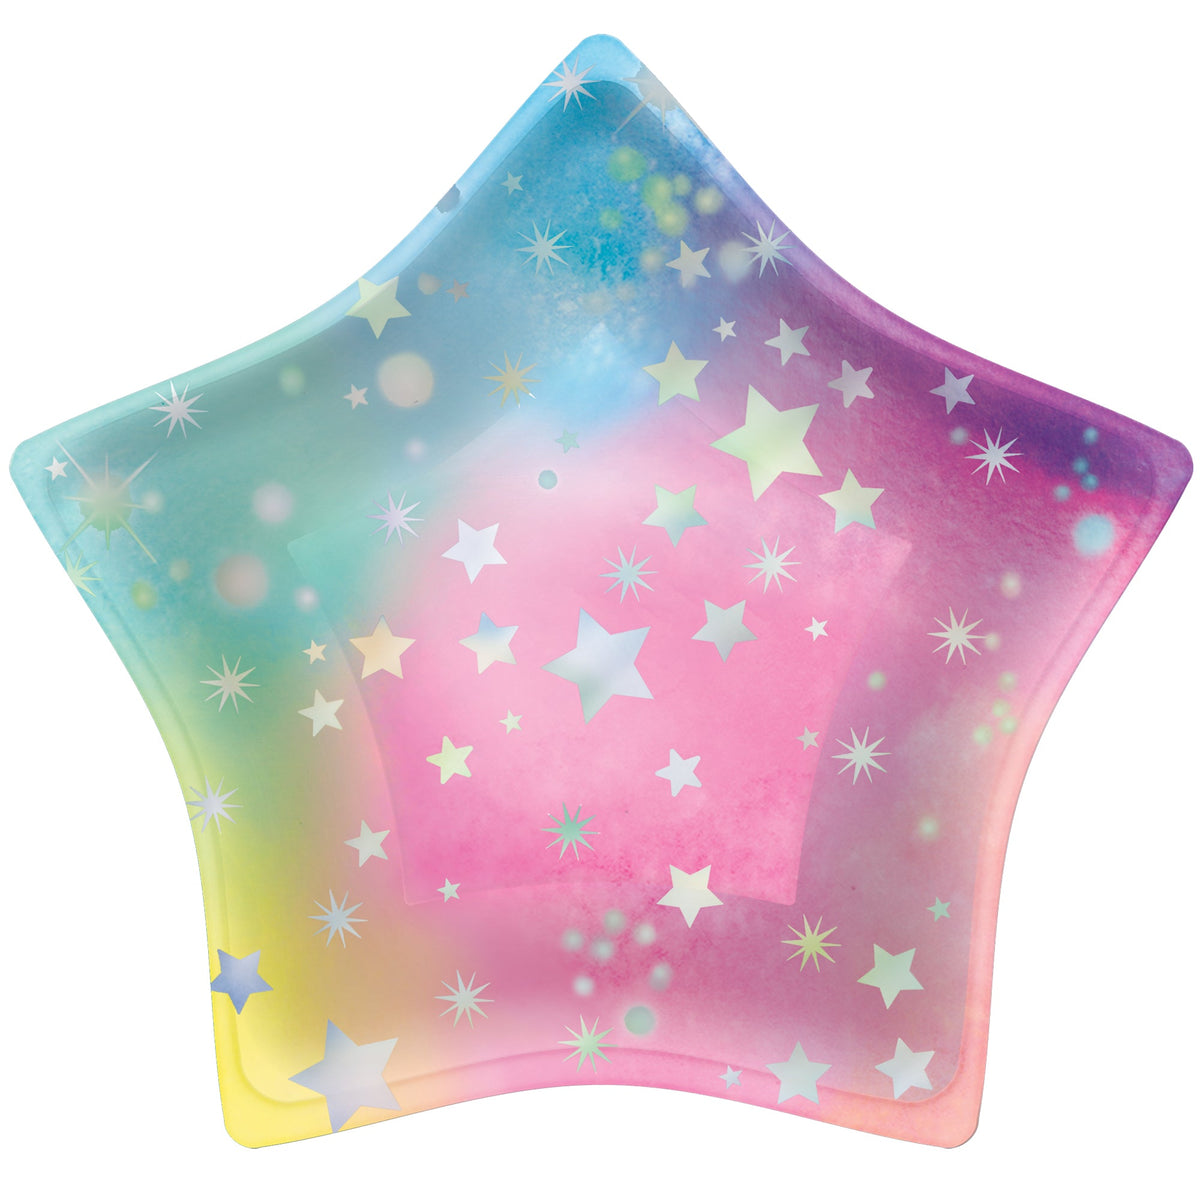 Luminous Iridescent 7 ' Star Shaped Plates Package of 8